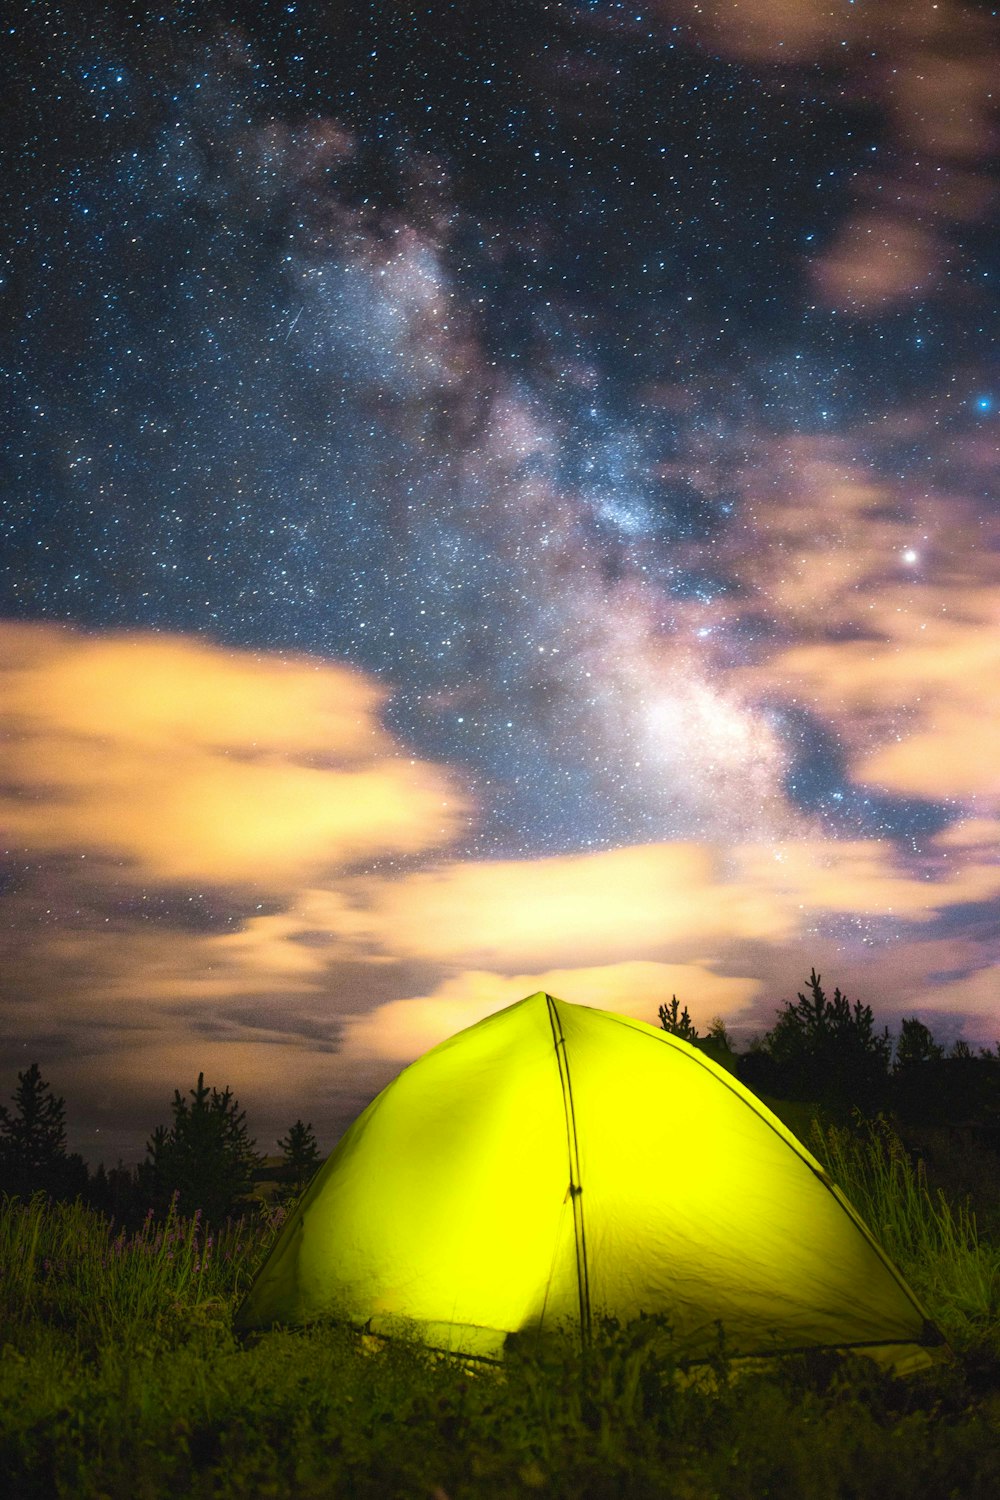 yellow dome tent on green grass field under night sky